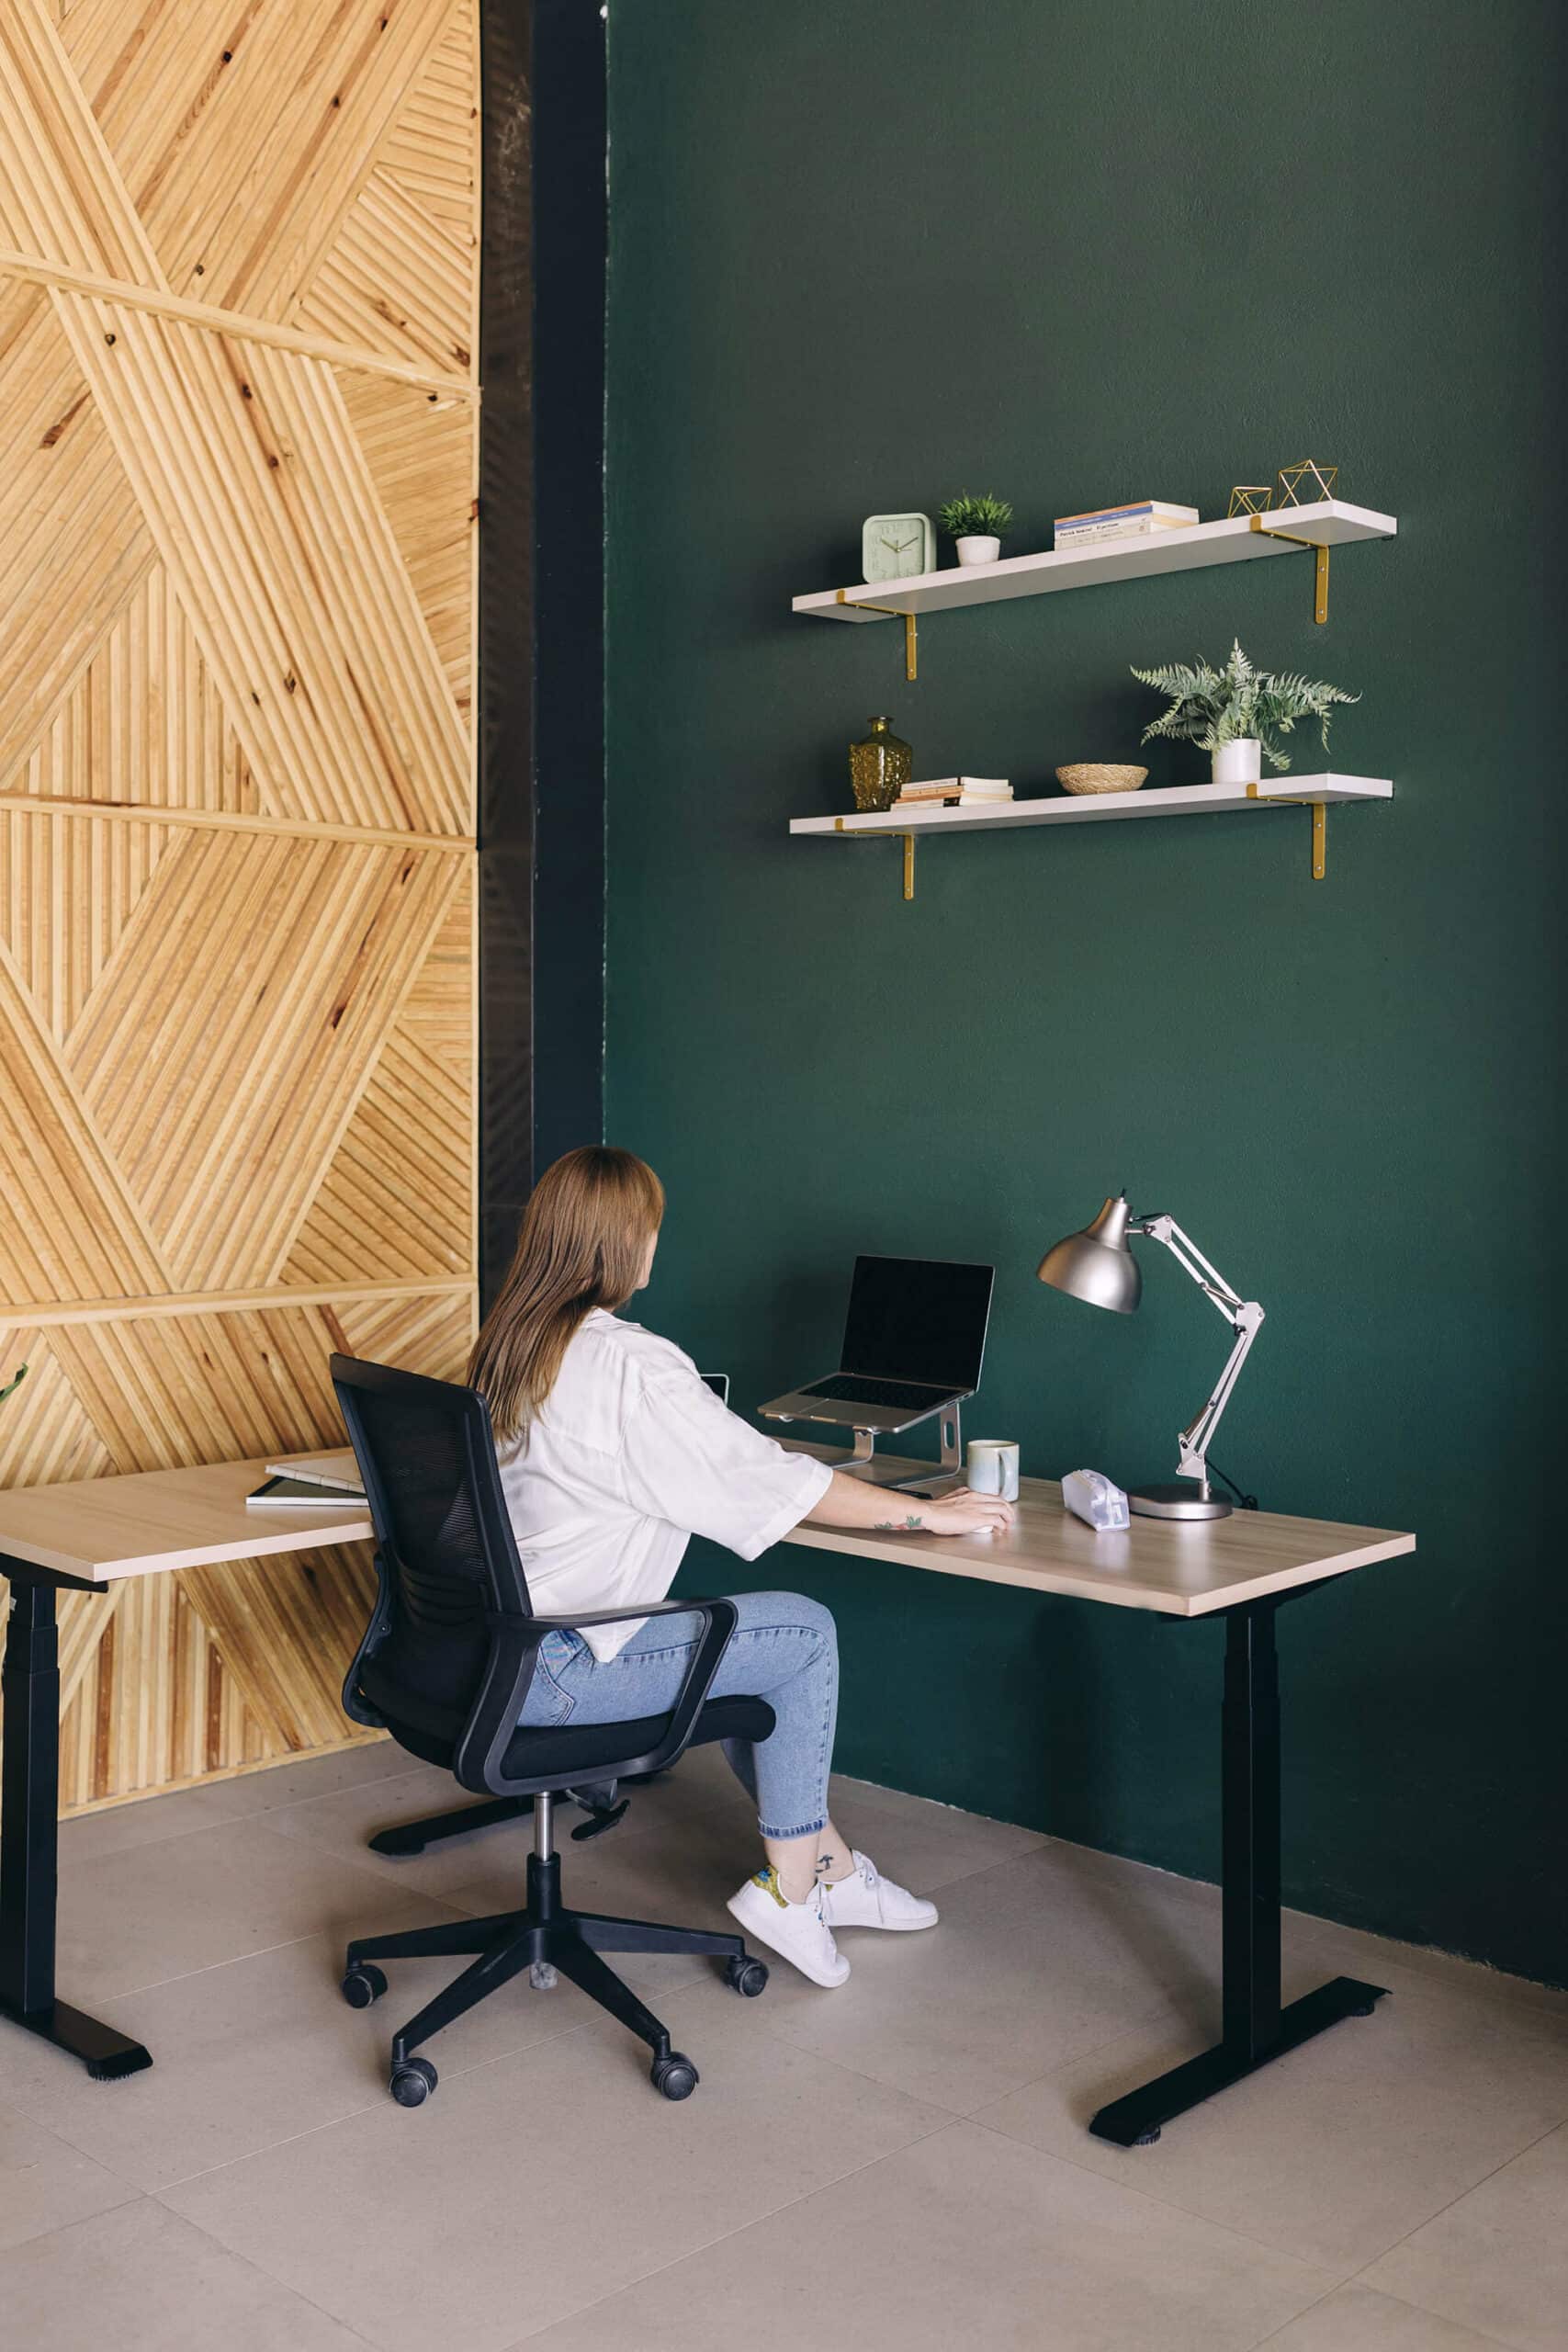 A woman sits at a modern wooden desk facing a wall painted green, working on a laptop which is elevated on a stand. The office has a stylish design with decorative shelves above the desk, an adjustable desk lamp, and a herringbone-patterned wood panel on the adjacent wall.